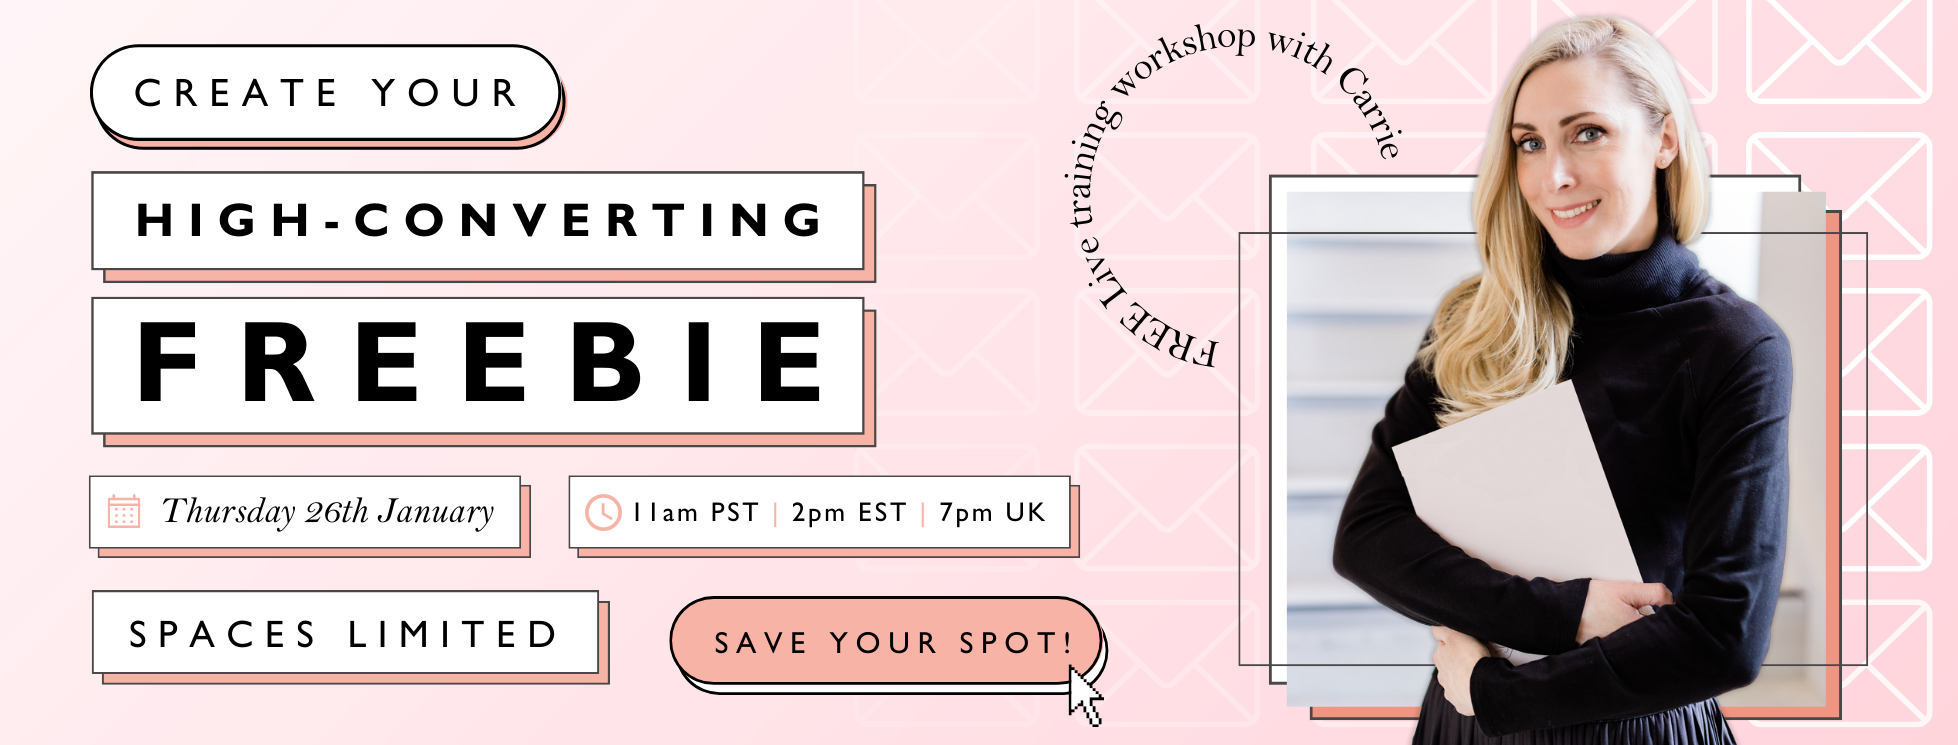 Create your high-converting Freebie workshop with Carrie Green